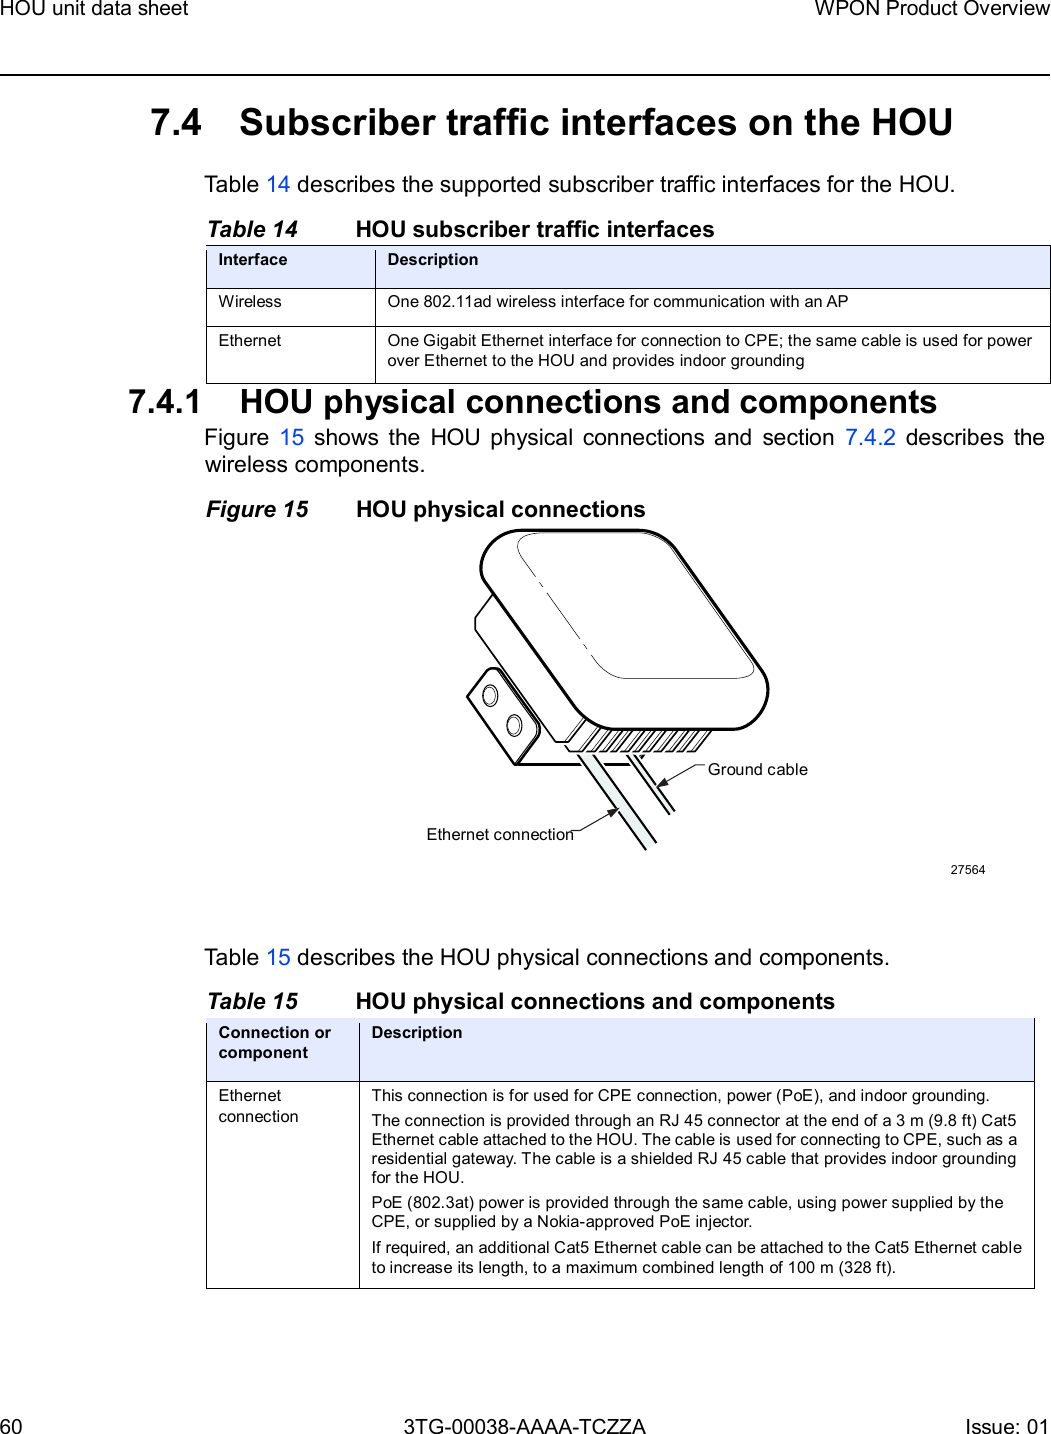 Page 60 of Nokia Bell 7577WPONAPED WPON User Manual WPON Product Overview